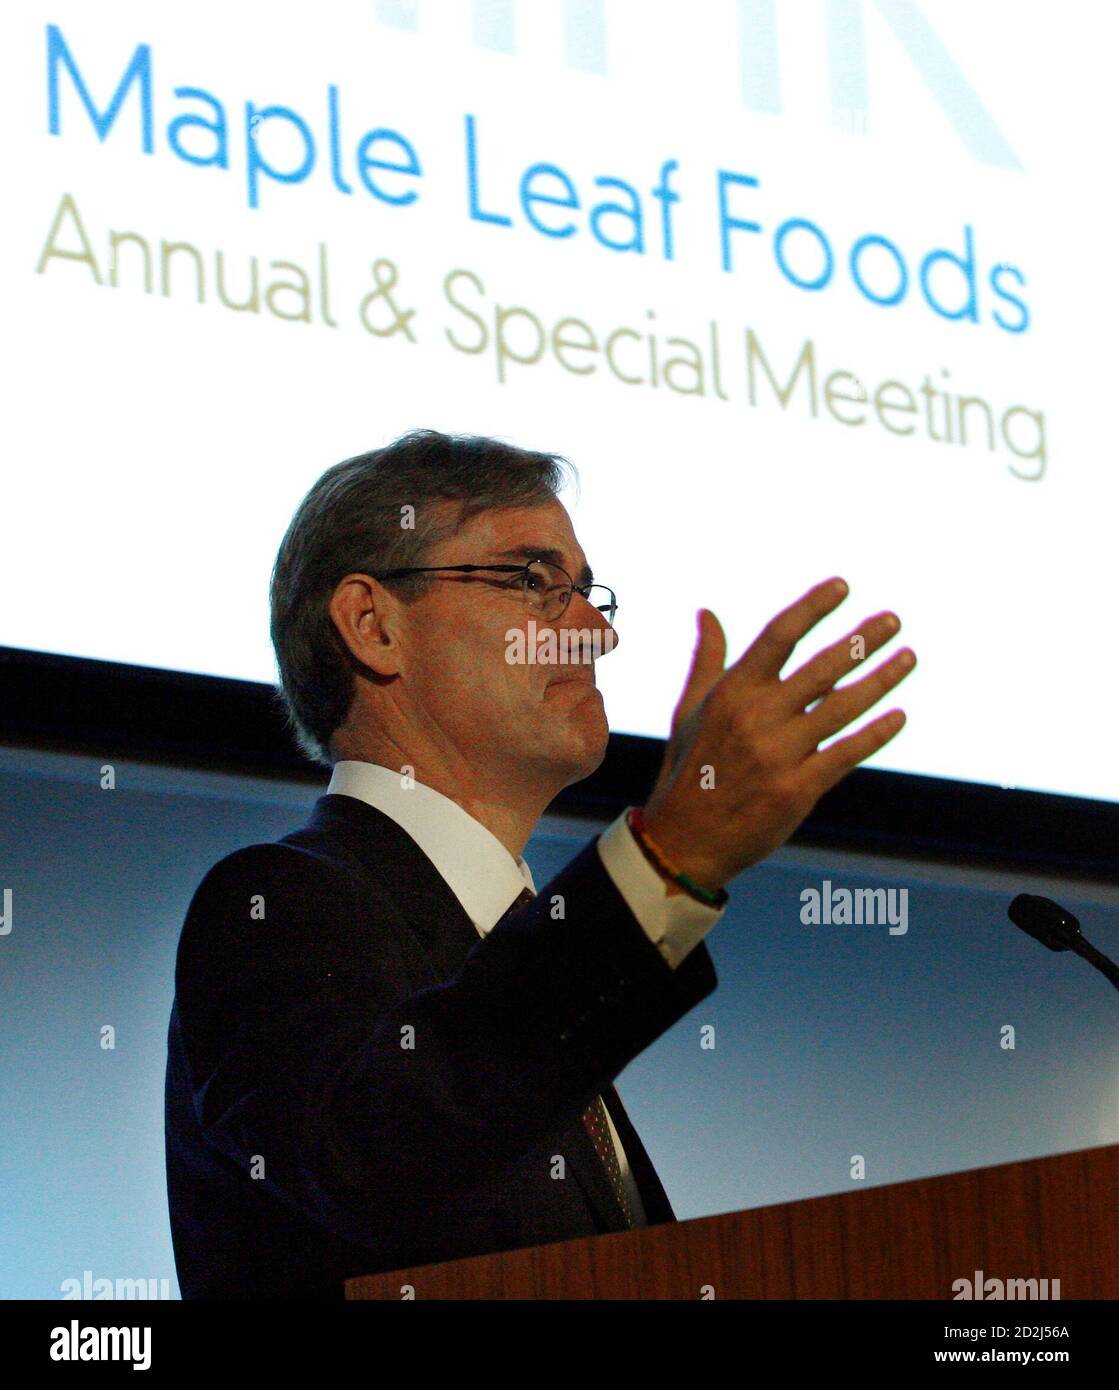 Maple Leaf Foods Inc. President and Chief Executive Officer Michael McCain speaks to shareholders during the company's annual general meeting in Mississauga, April 29, 2009.     Maple Leaf Foods, one of Canada's largest food processors, reported a quarterly profit on Wednesday but the effects of last summer's costly recall of tainted meat lingered on.    REUTERS/ Mike Cassese   (CANADA BUSINESS FOOD) Stock Photo